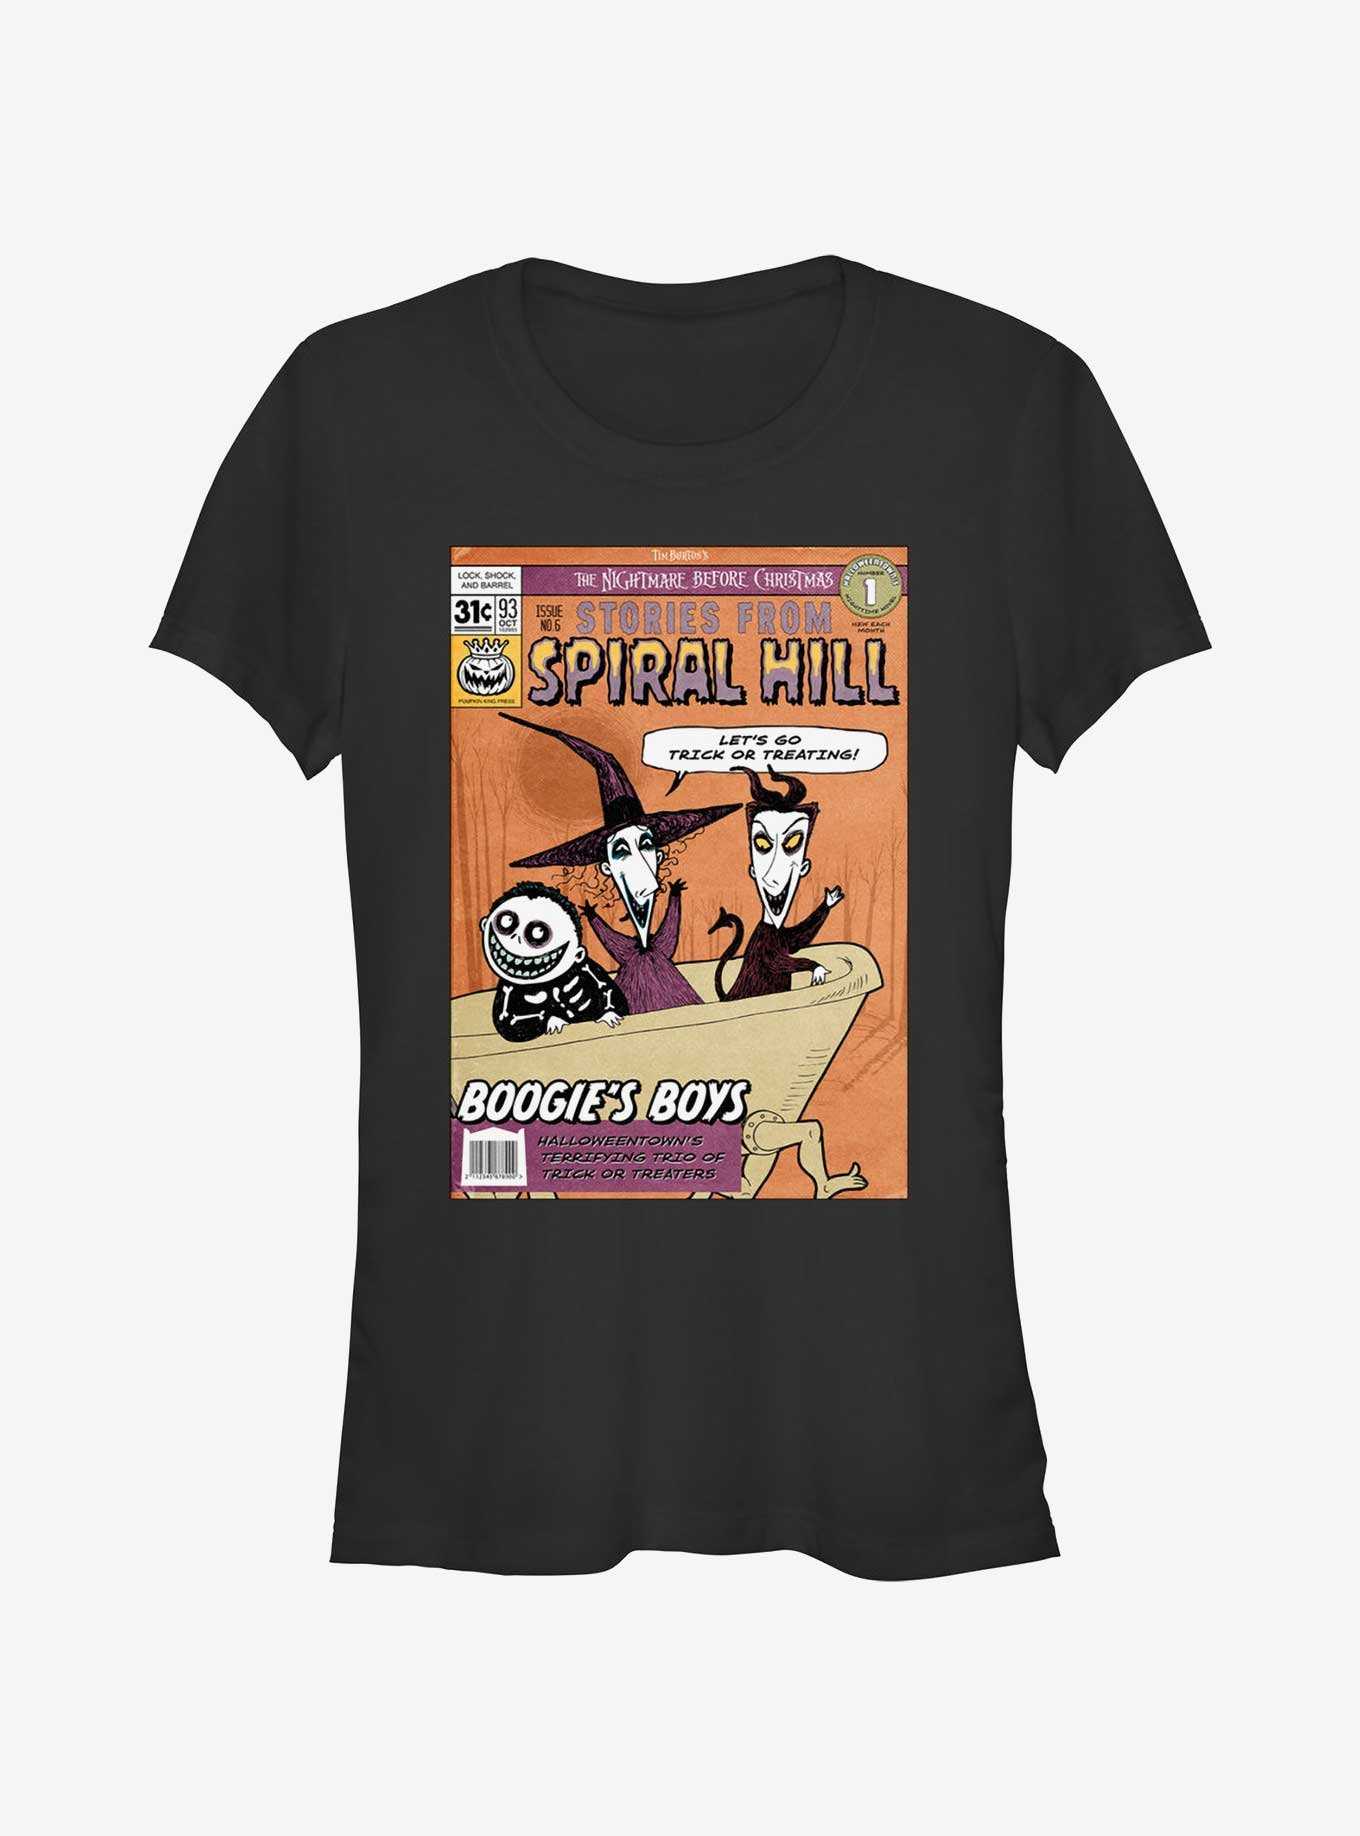 Disney The Nightmare Before Christmas Stories From Spiral Hill Boogie's Boys Girls T-Shirt, , hi-res